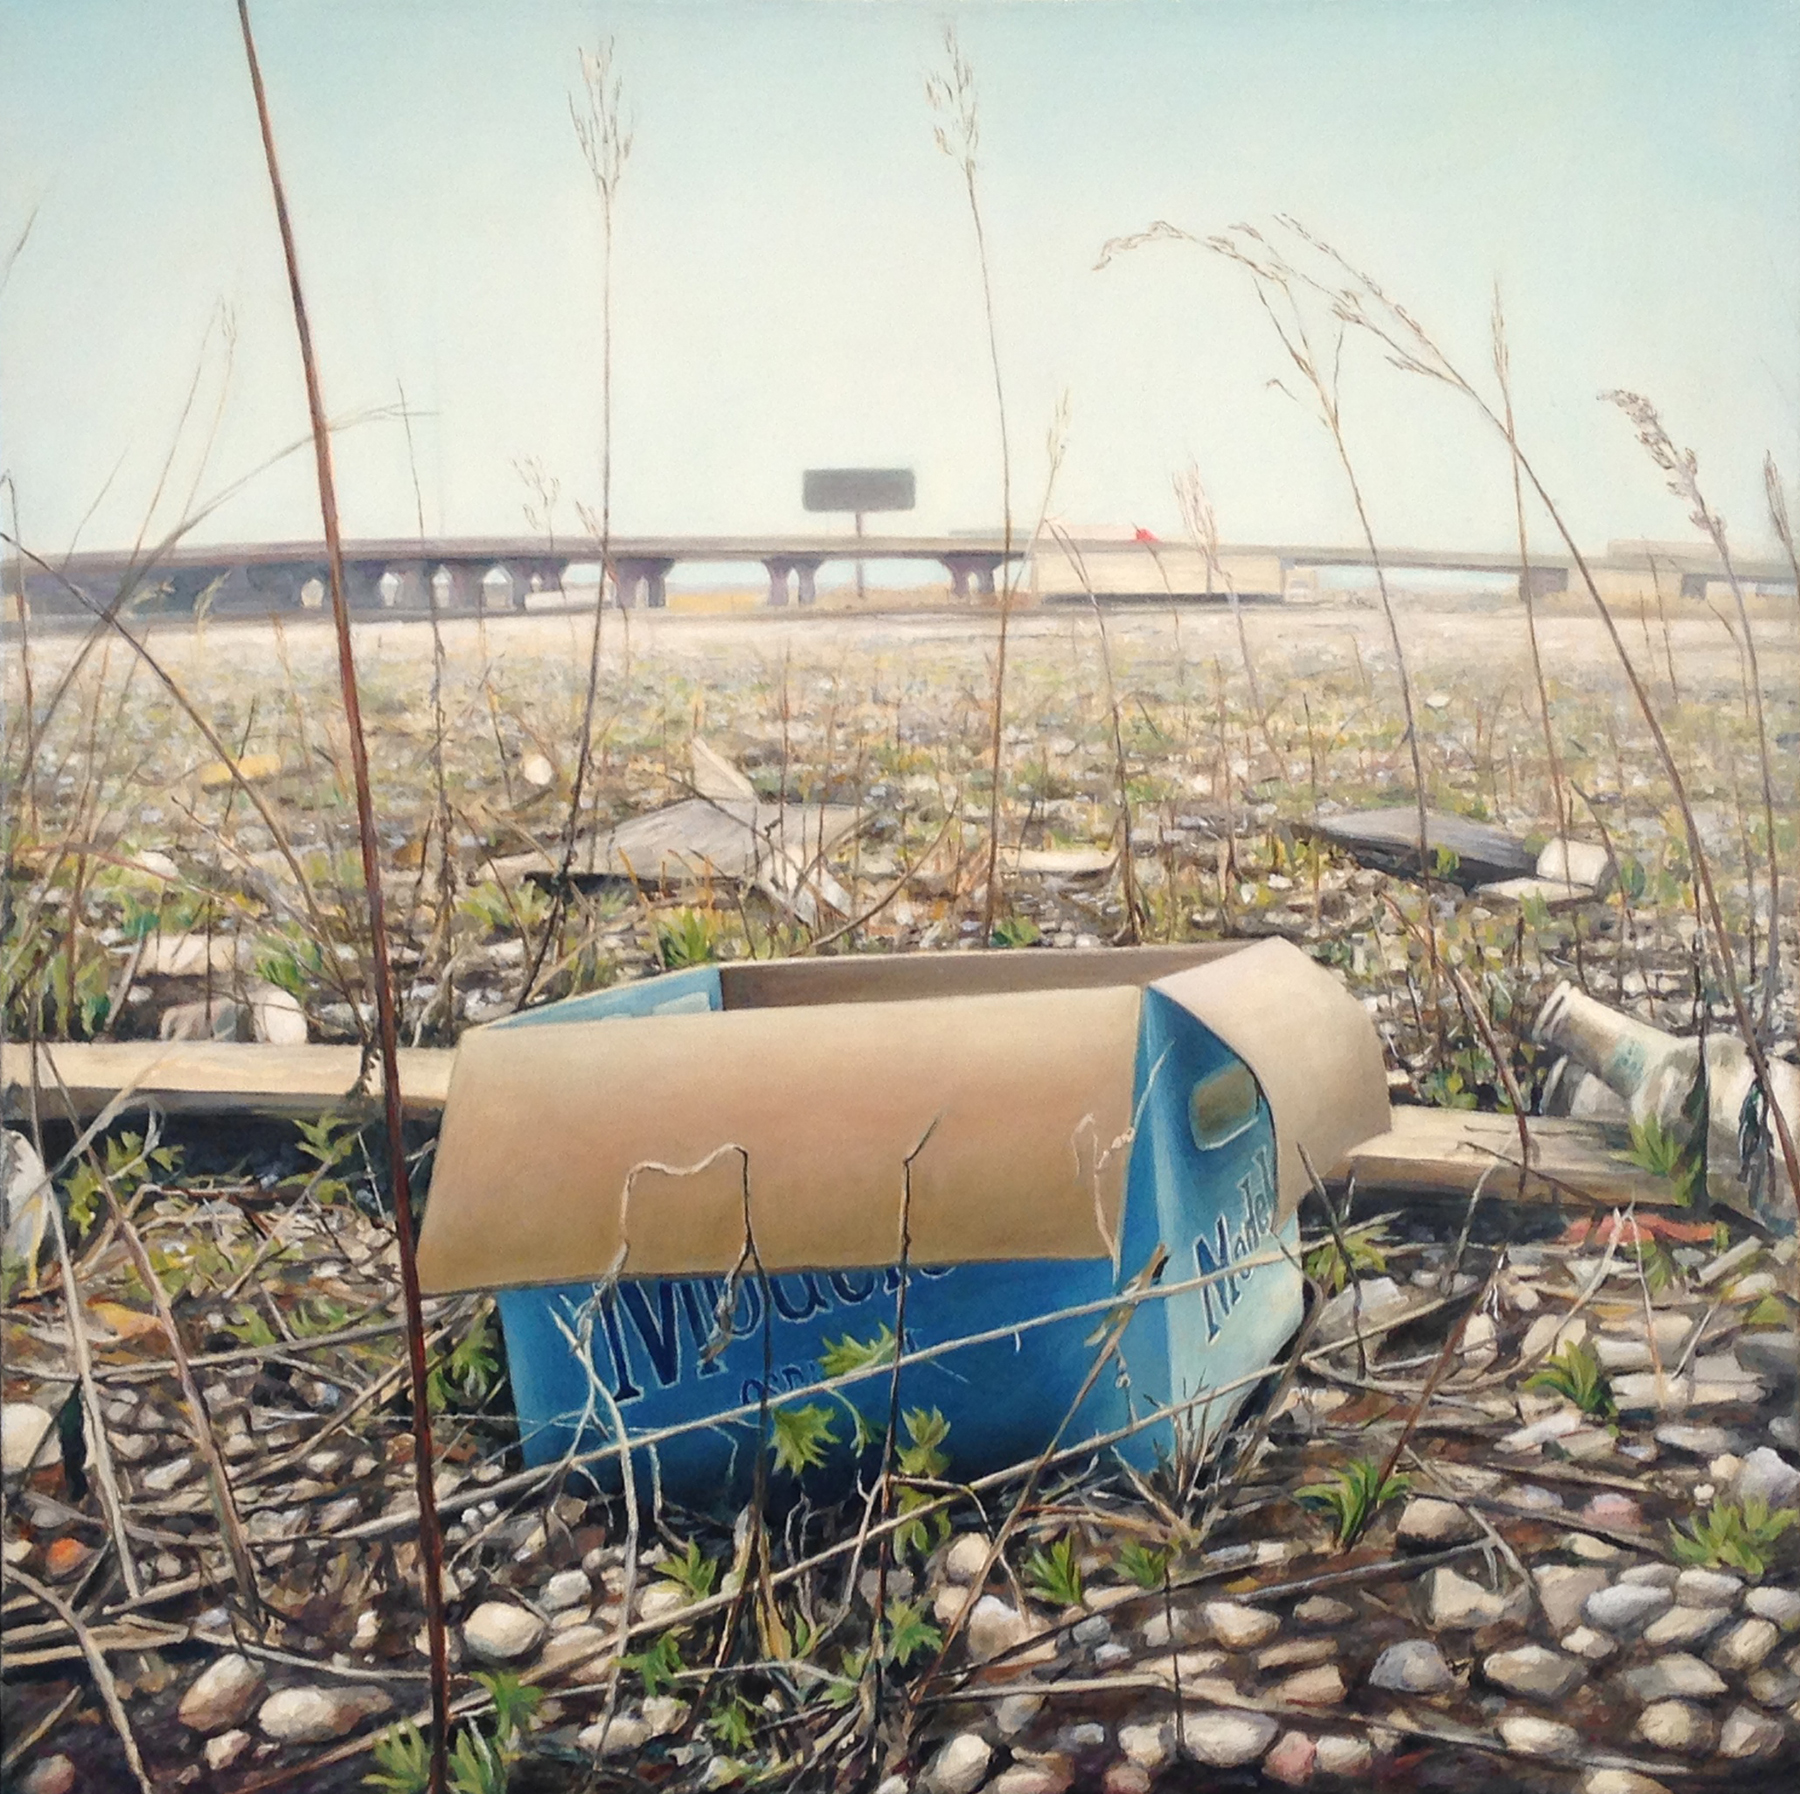   Beer Case in Empty Lot    Near Expressway   2011  Oil on canvas  20 x 20 inches    